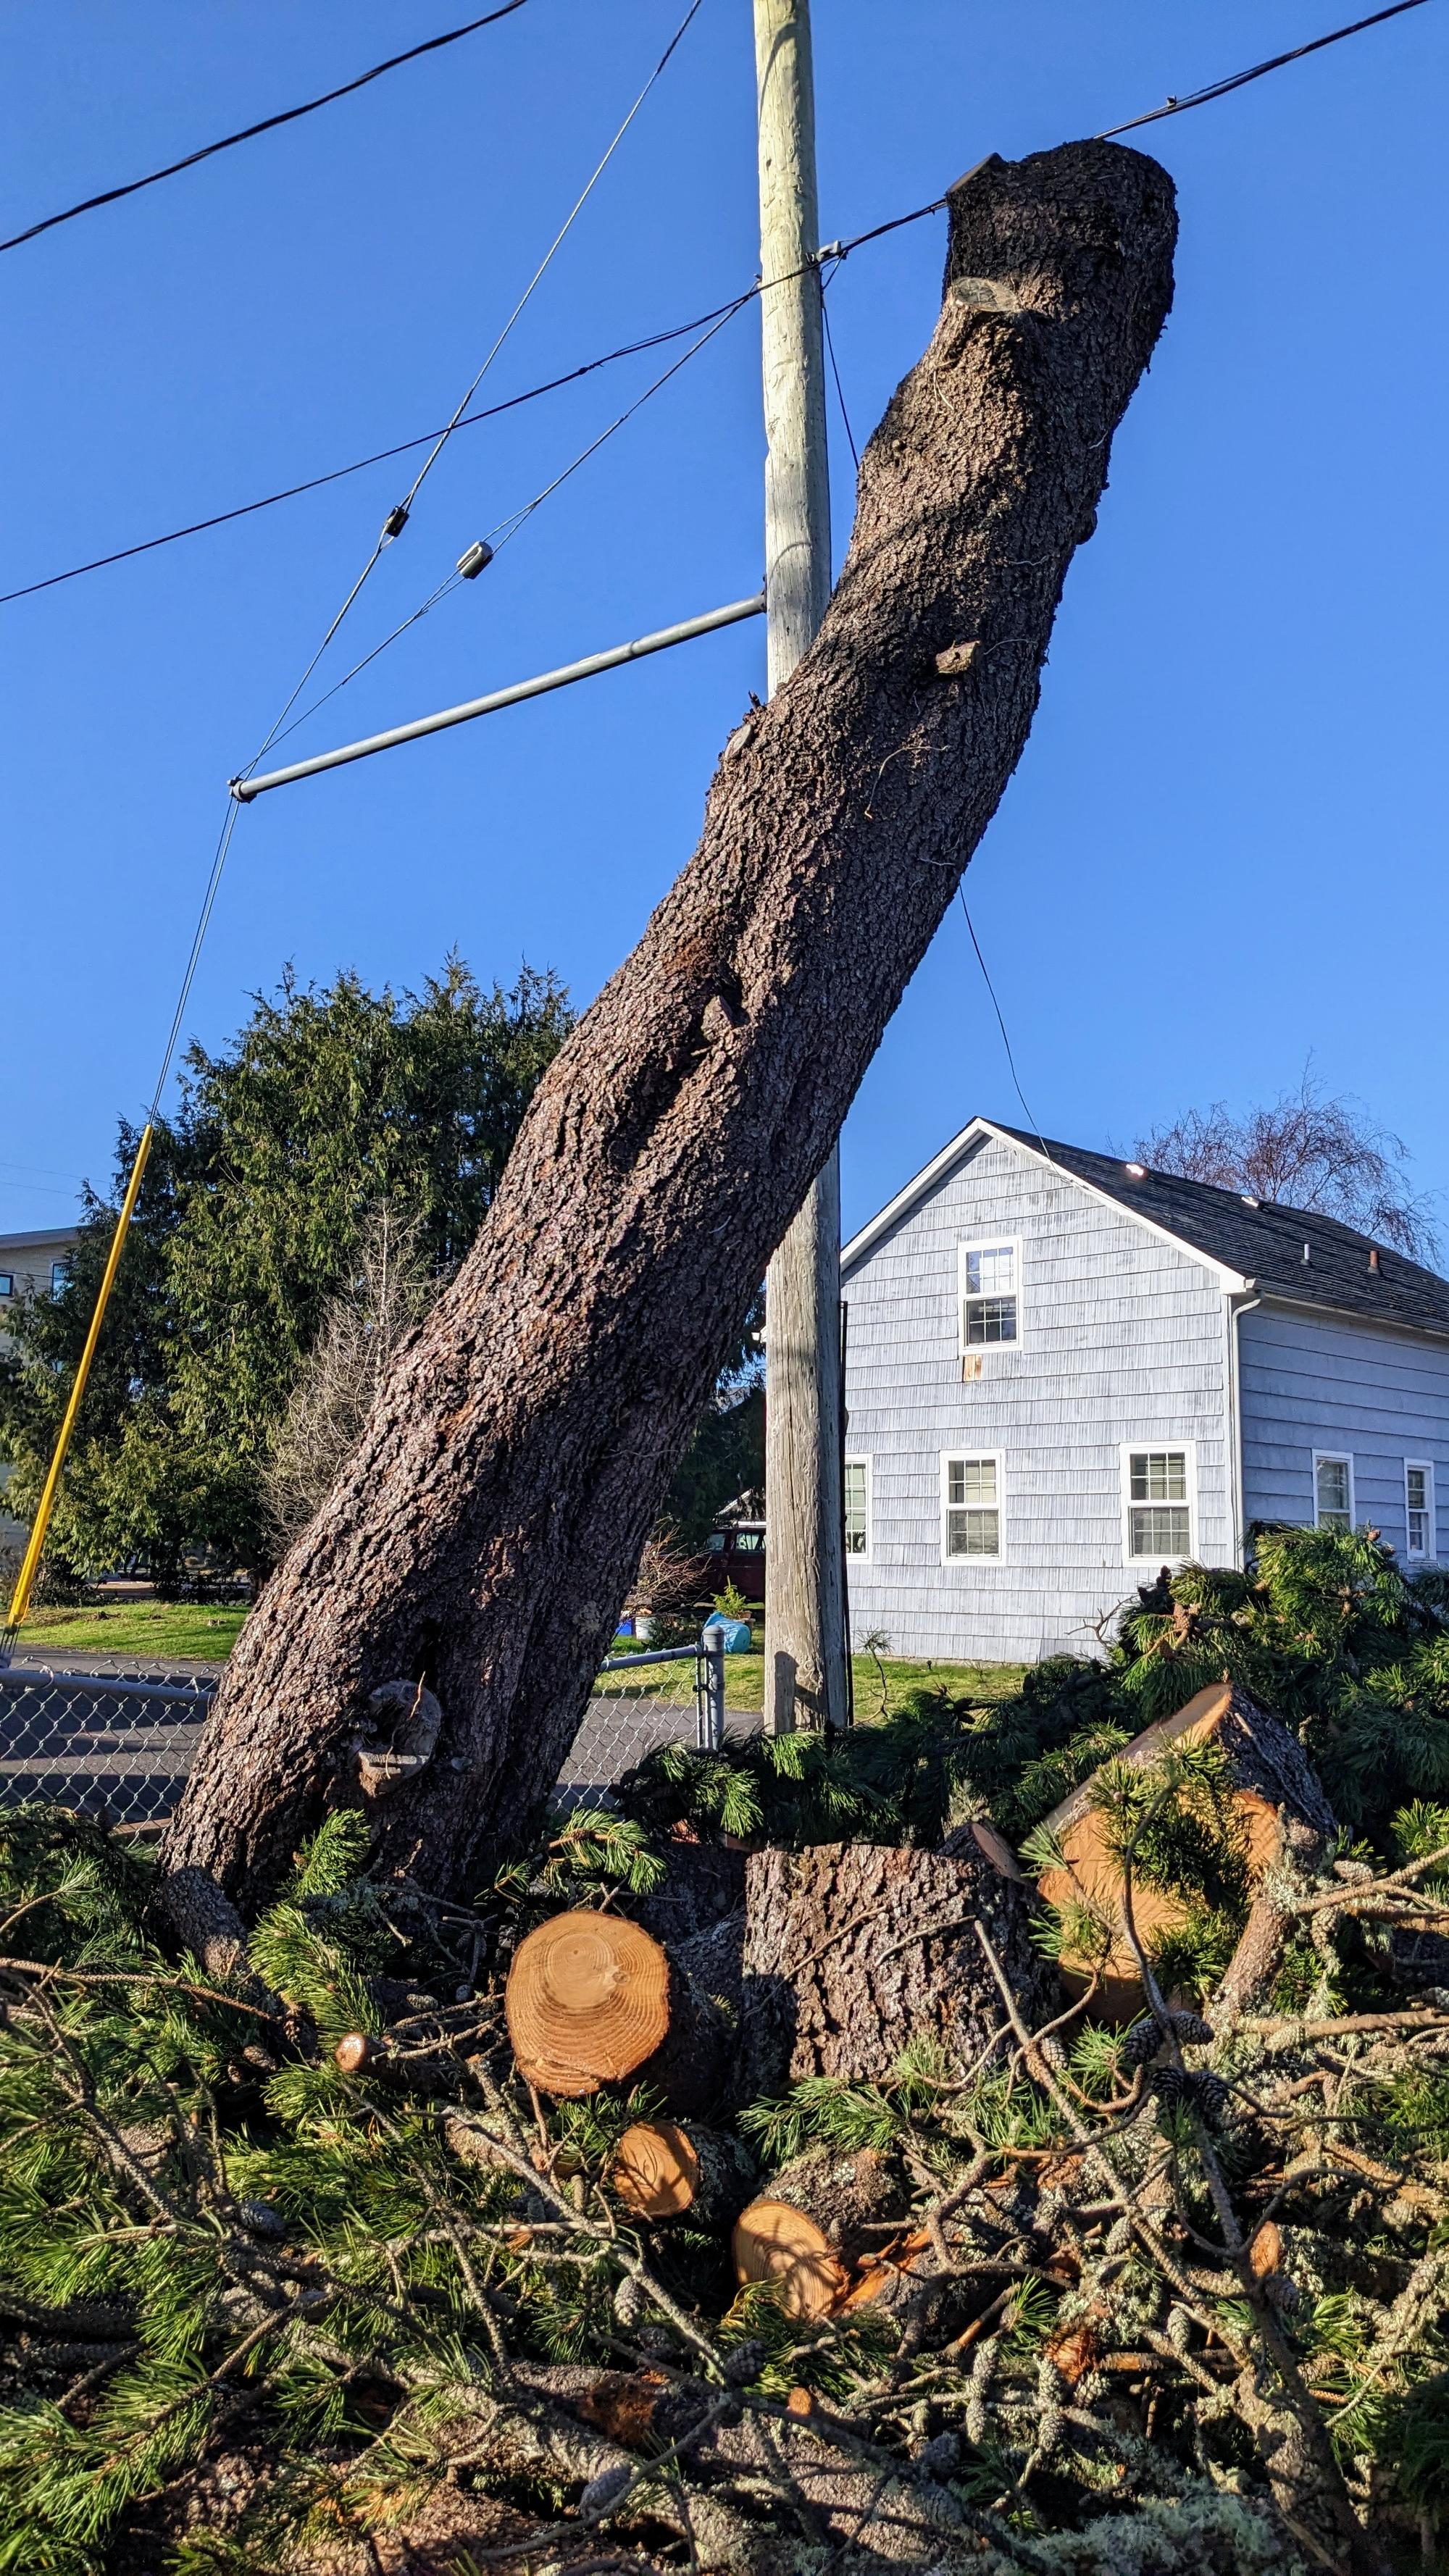 A tree trunk leans against a power line